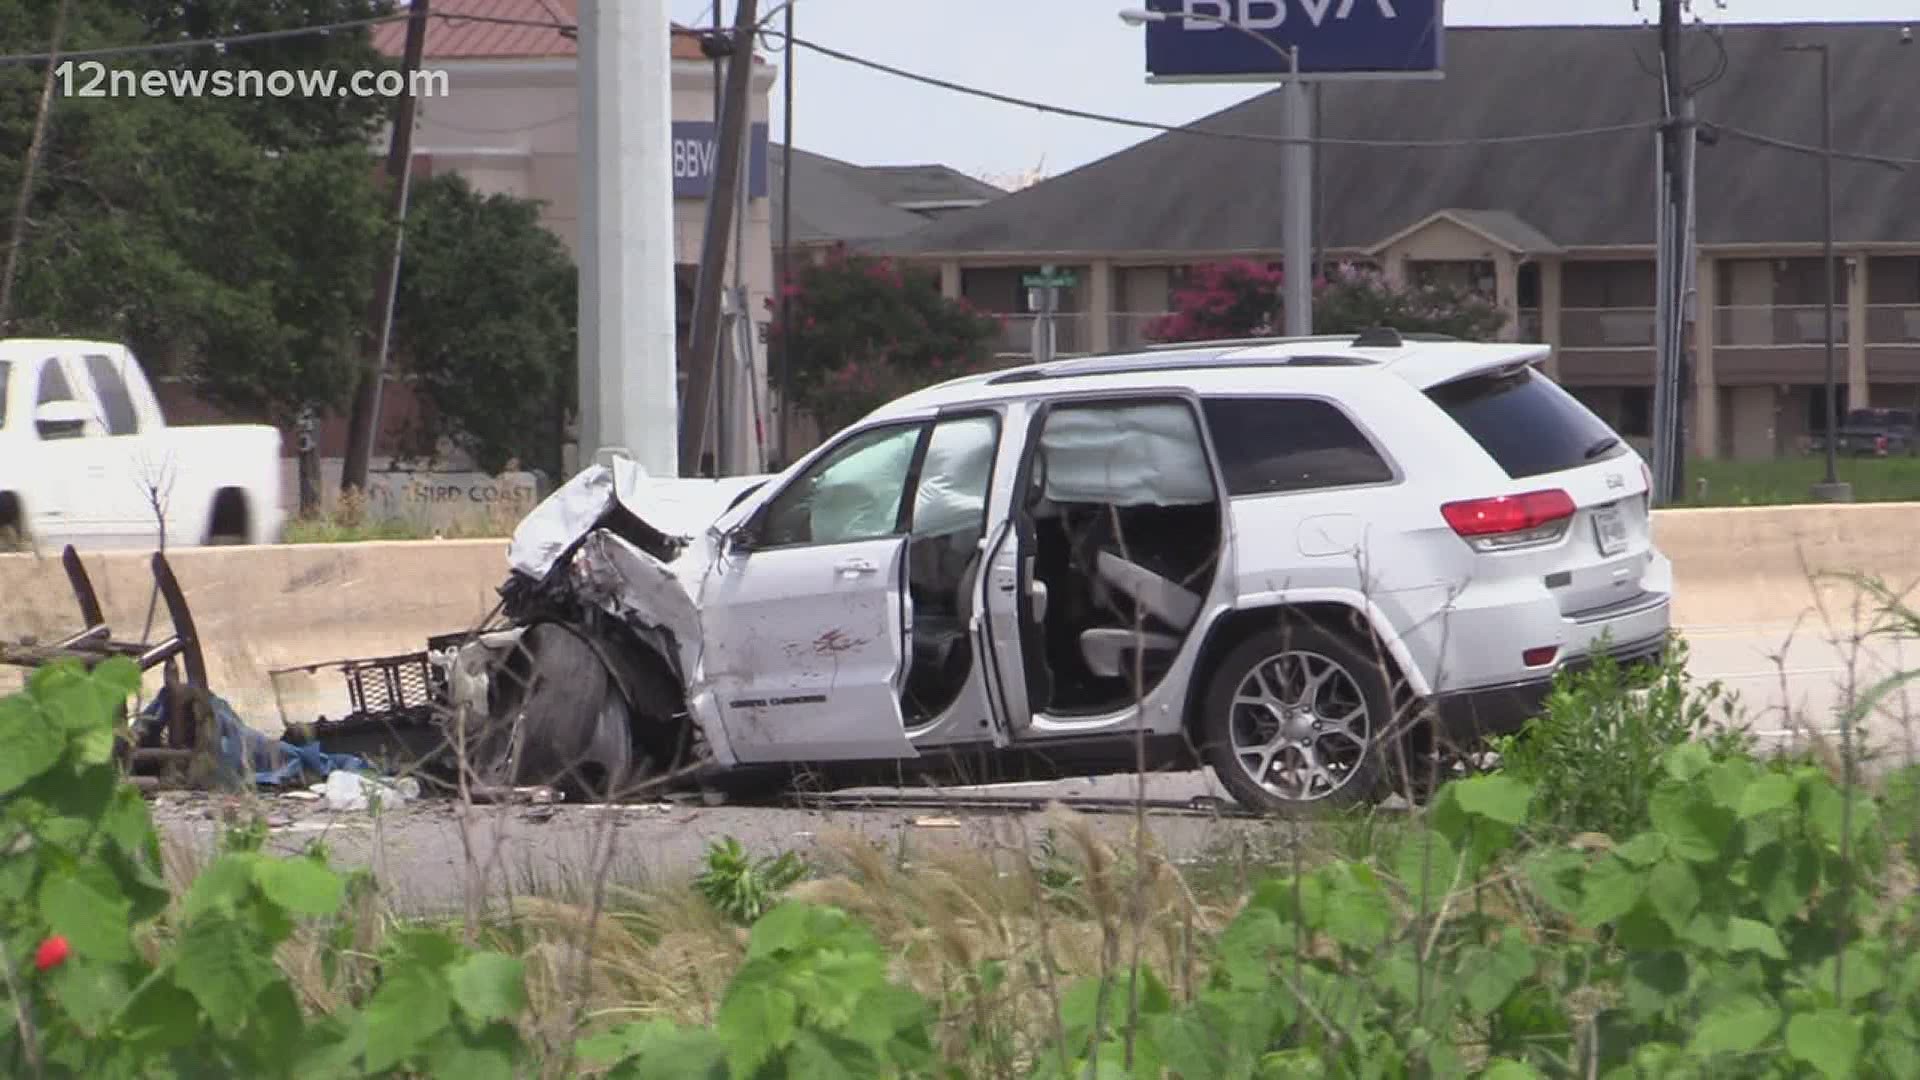 The accident happened around 1:30 p.m. and involved four vehicles on Highway 69 southbound in Port Arthur. Details surrounding the crash are unclear at this time.